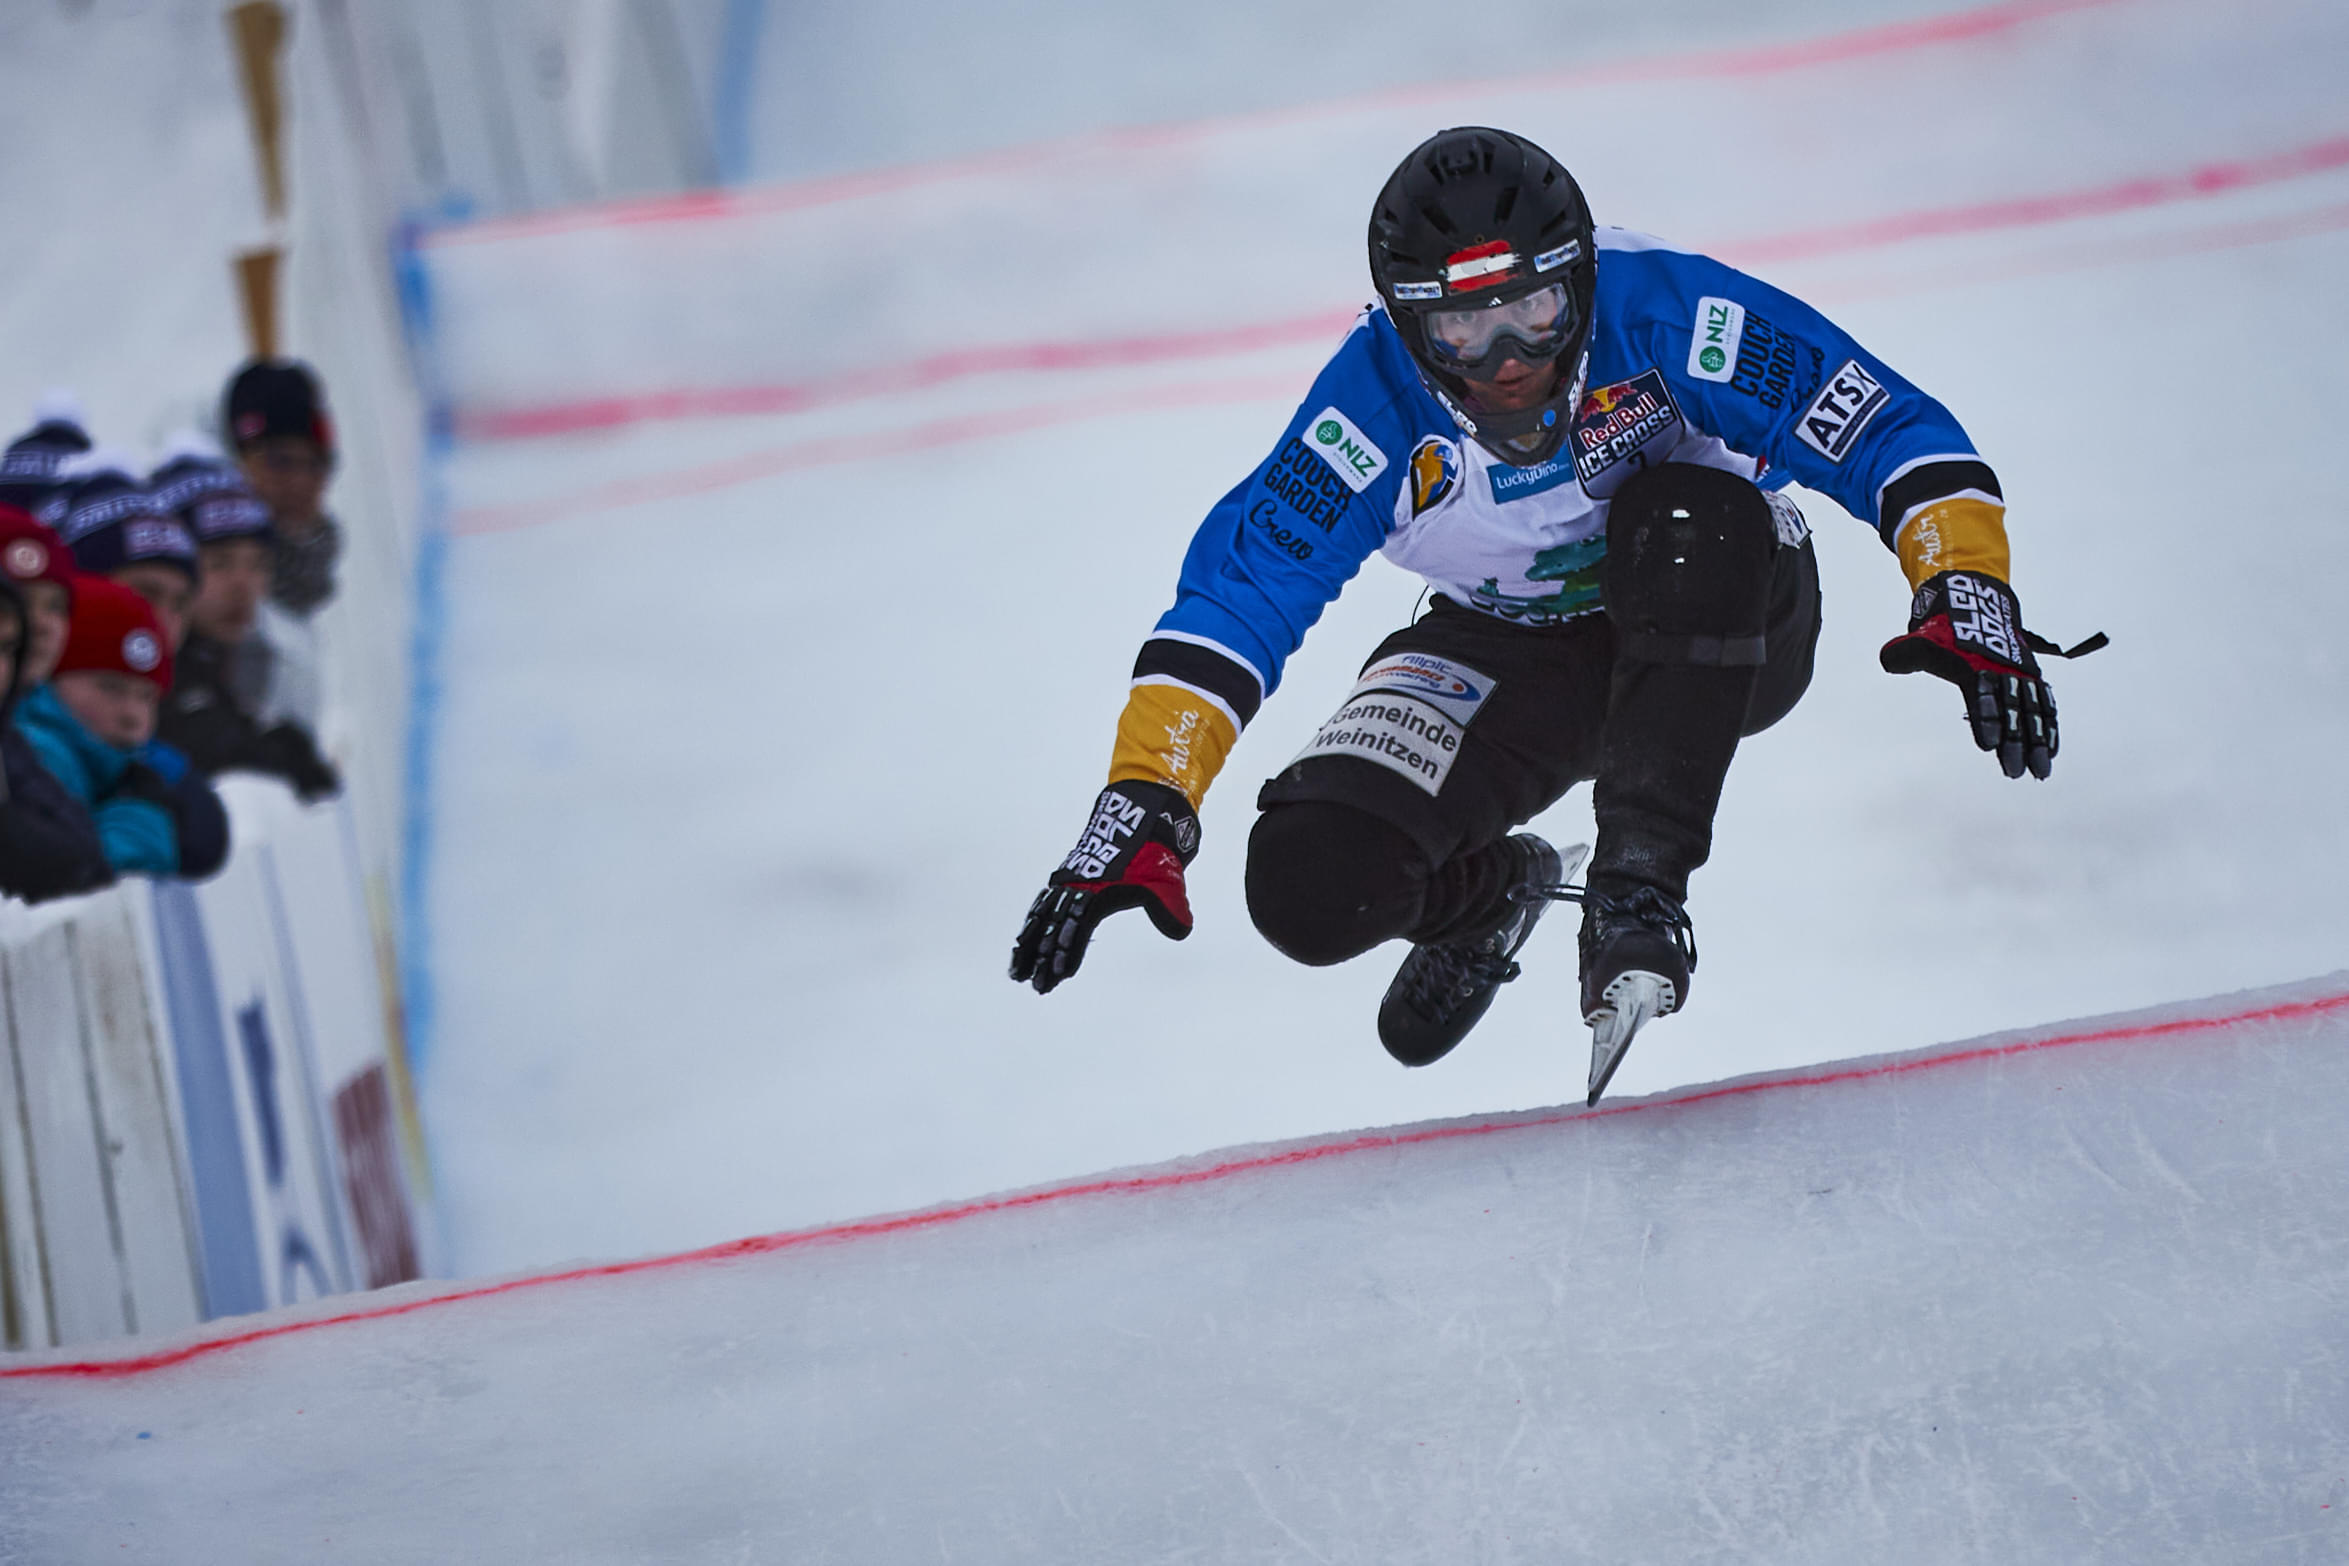 Marco Dallago was in the zone at Rautalampi. Image: Andreas Langreiter / Red Bull Content Pool